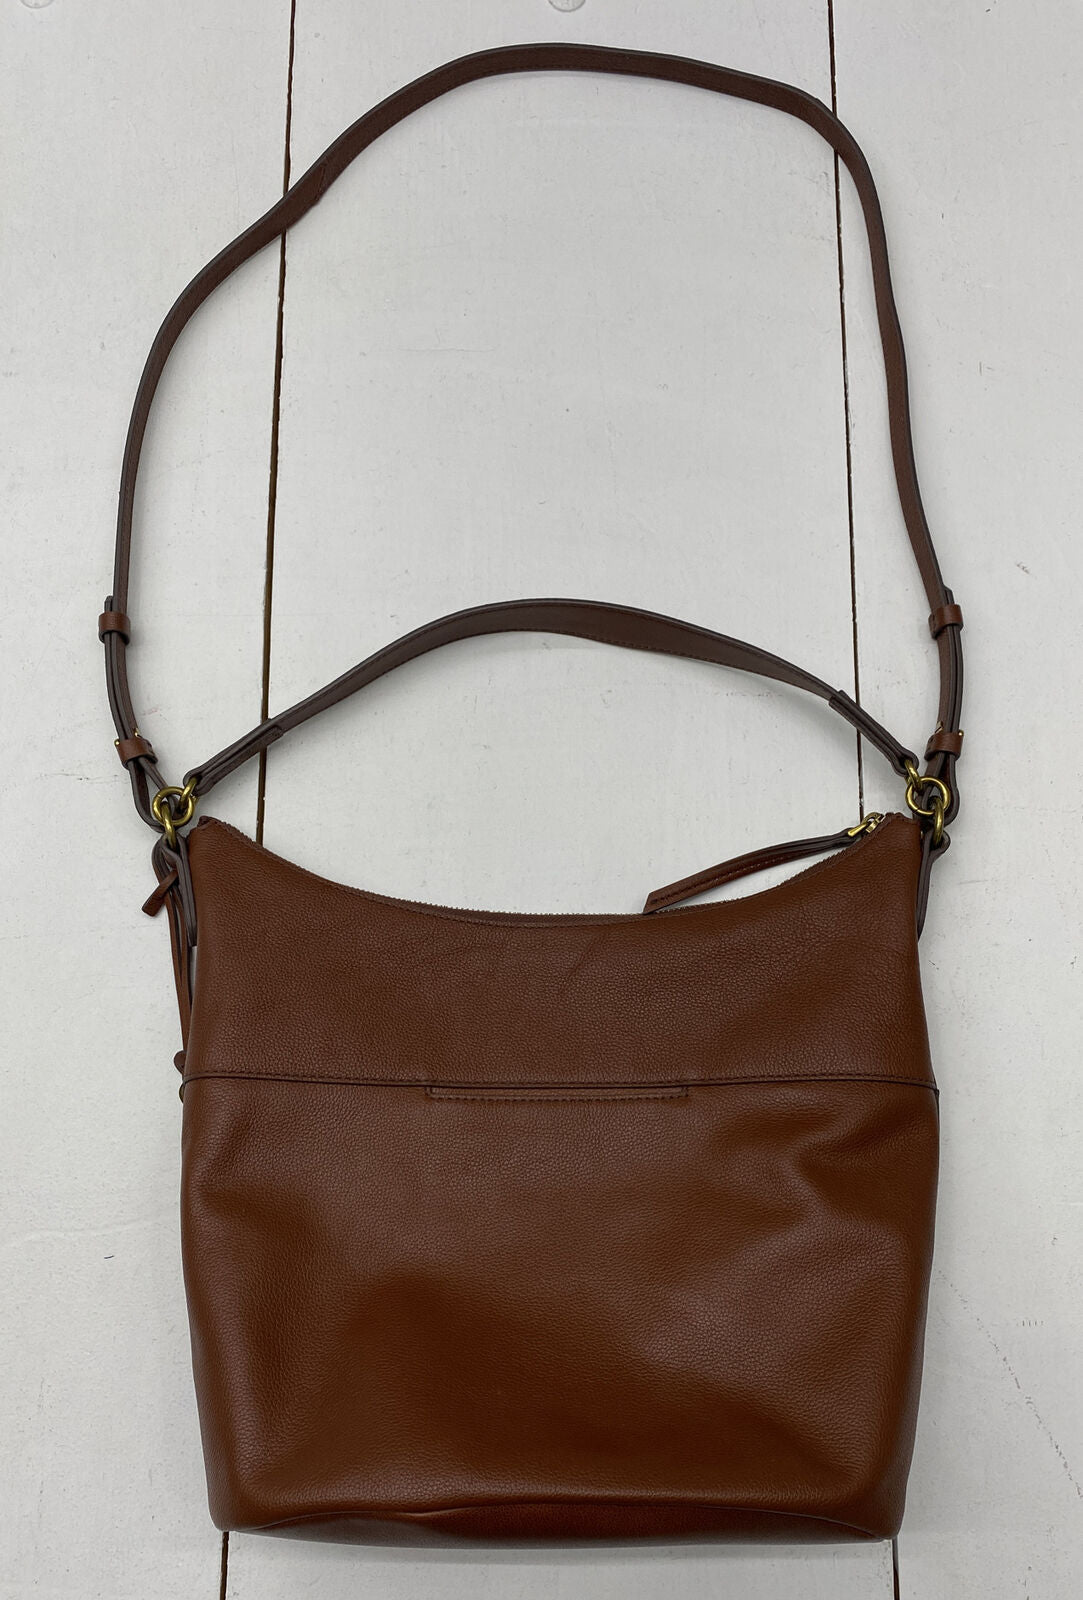 Fossil SHB2840 Talulla Small Hobo Bag Brown Leather Purse* - beyond exchange